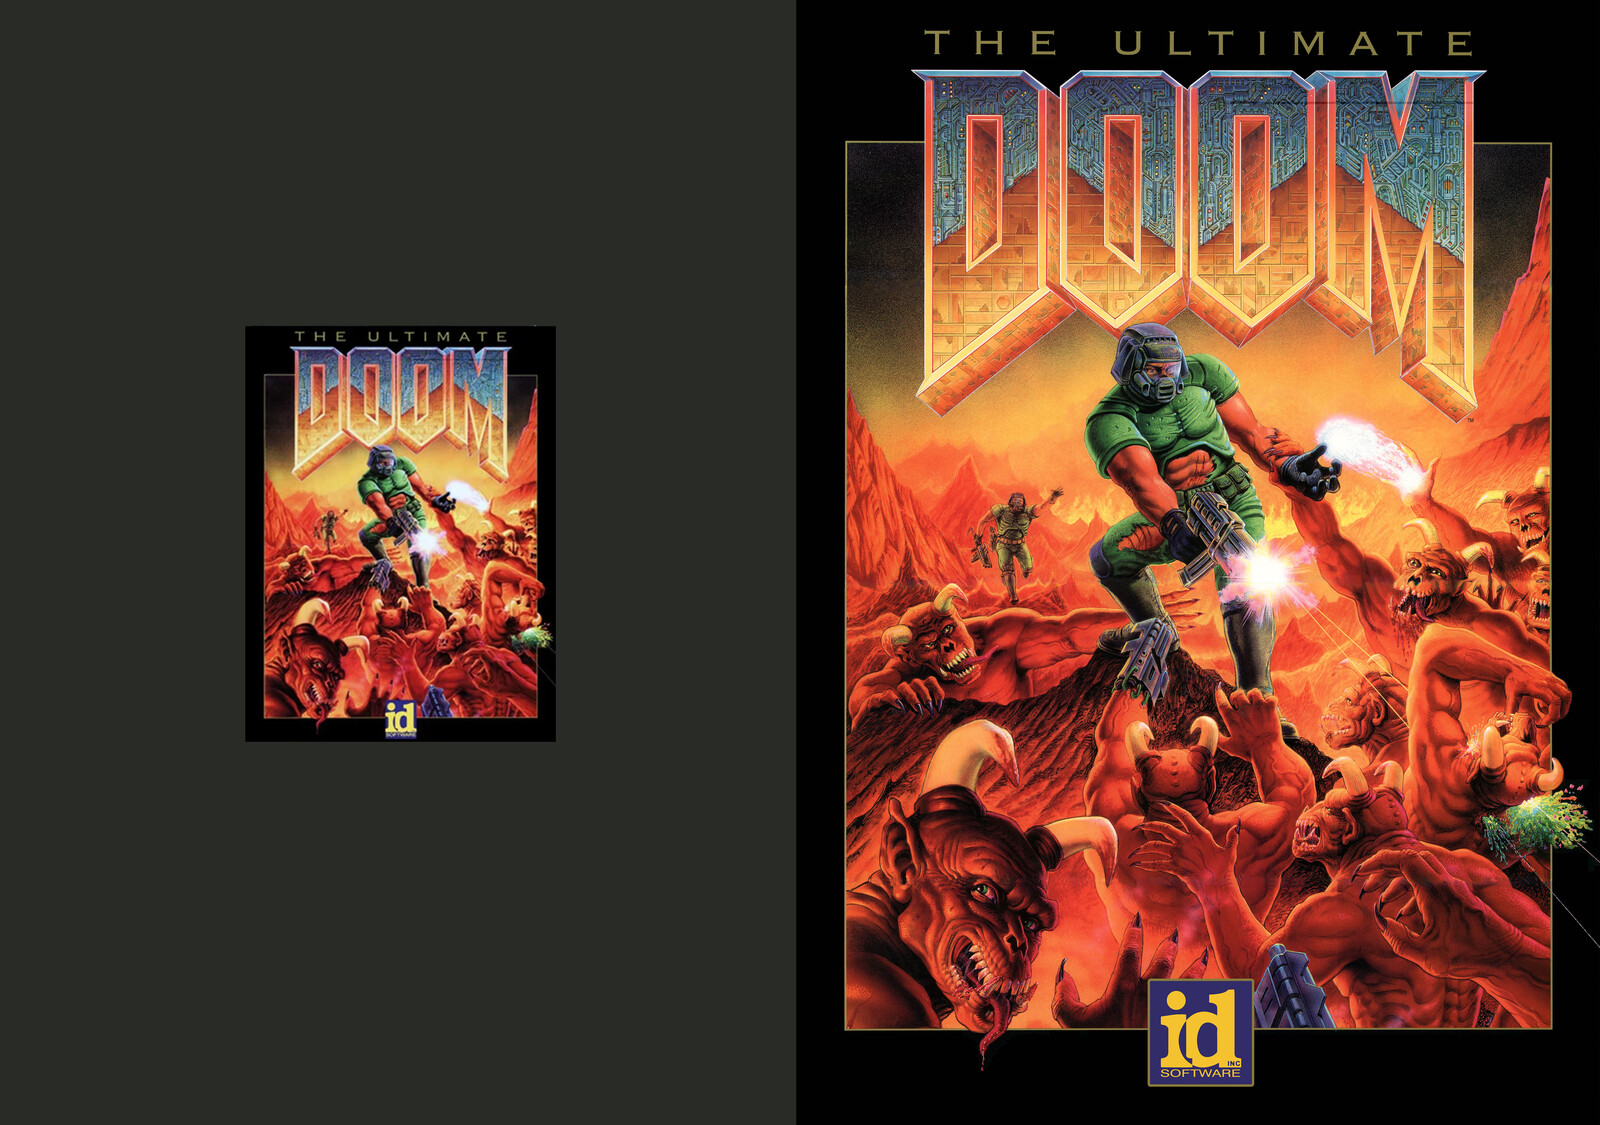 The Ultimate Doom (scan cover vs. retouched)